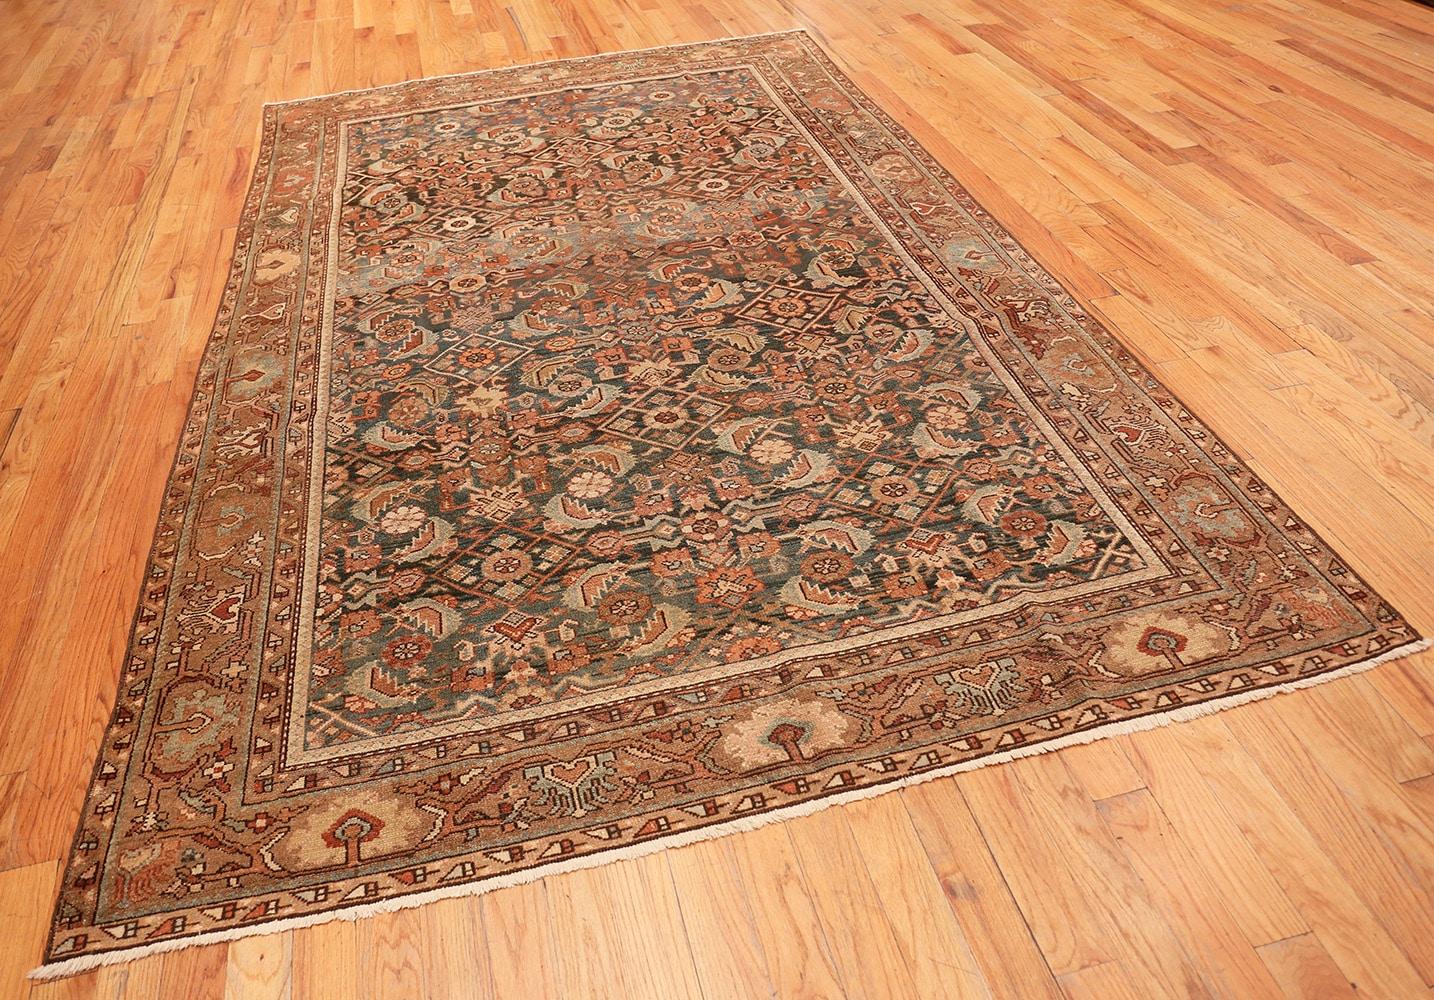 Antique Tribal Persian Malayer Rug. Size: 6' 6